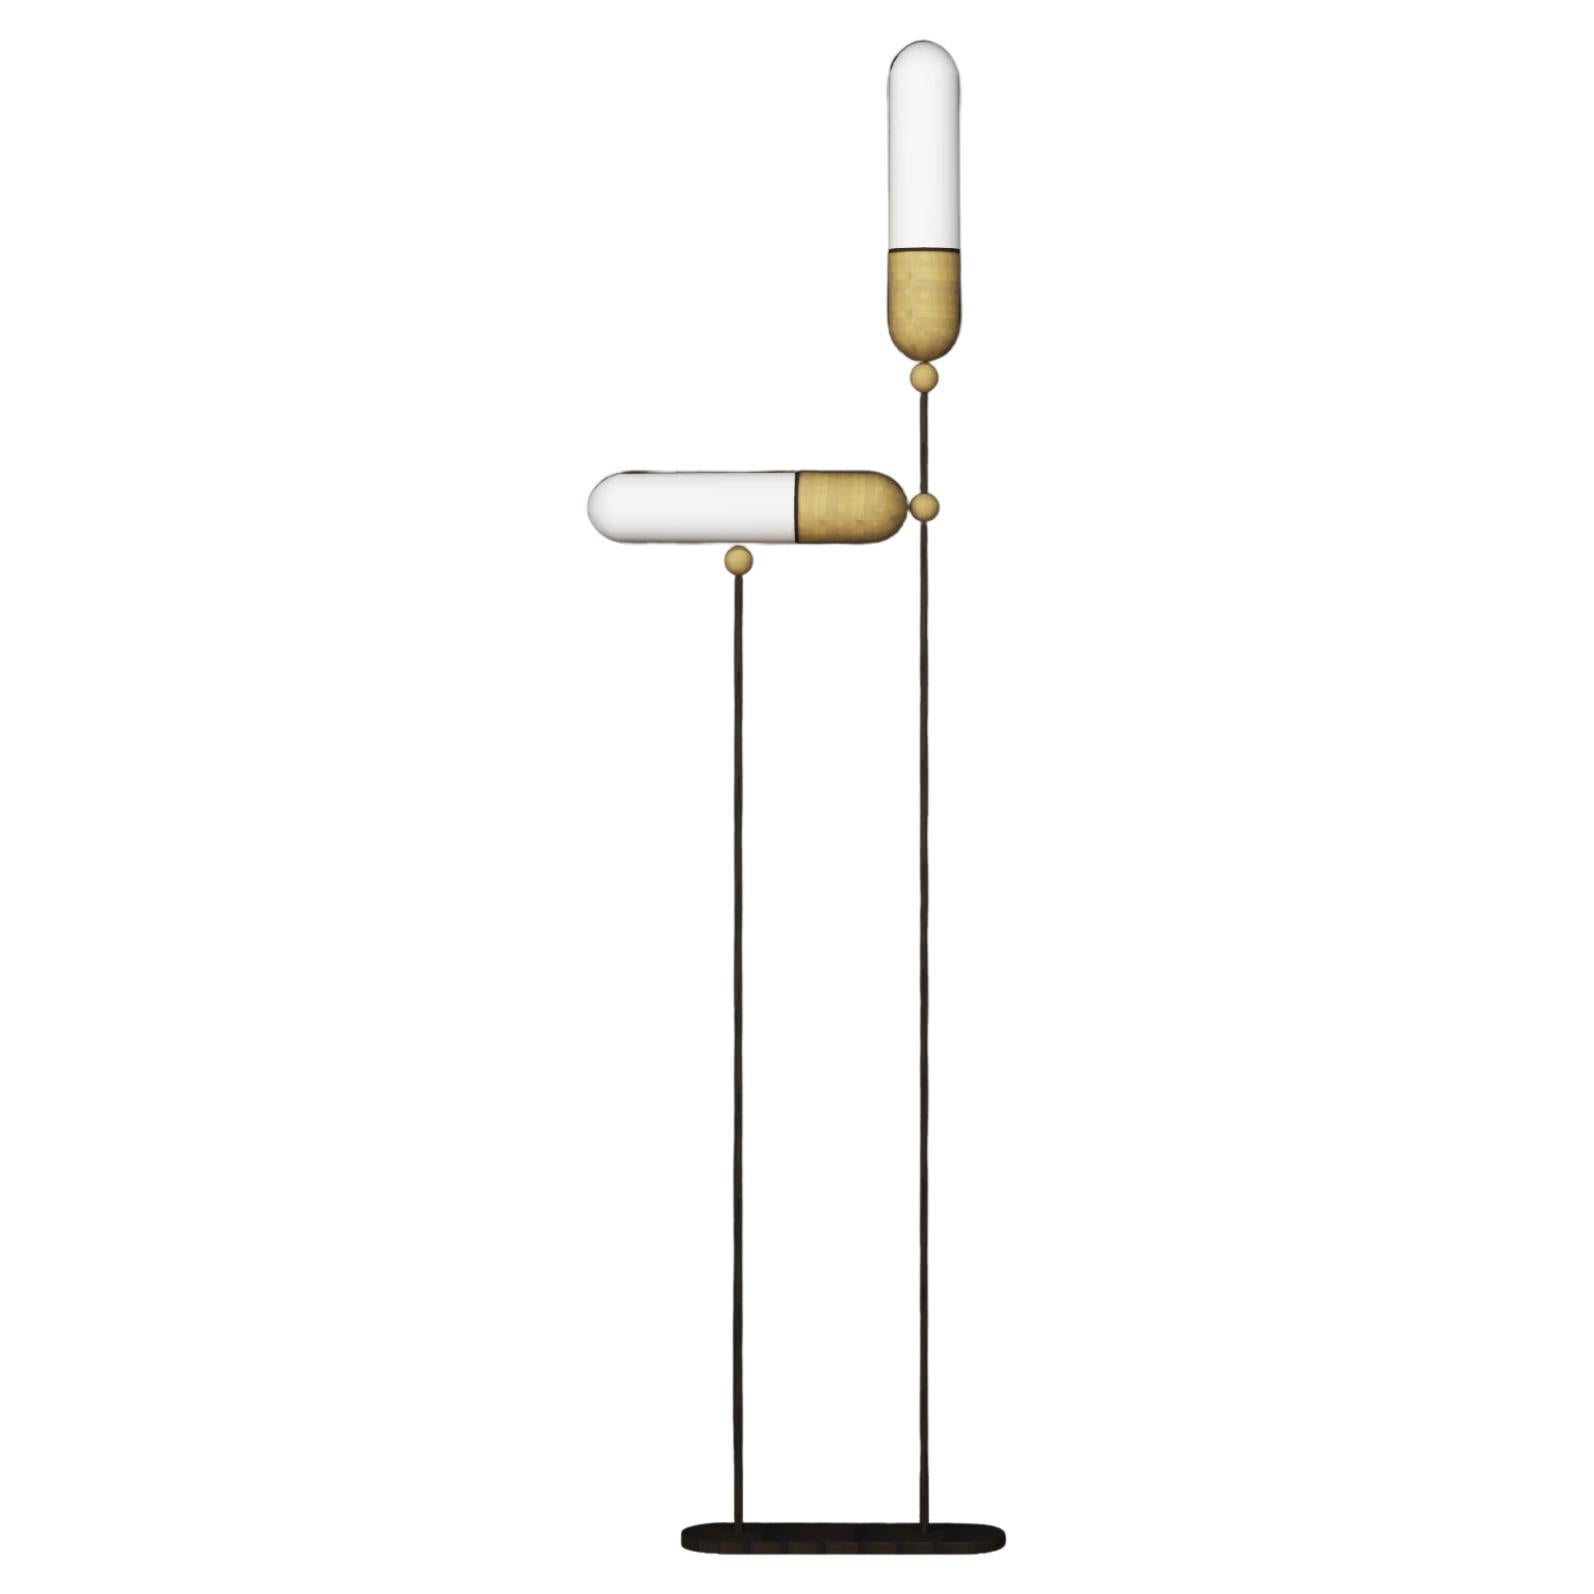 Imagin Deco Floor Lamp in Antique Bronze, Antique Brass and Frosted Glass For Sale